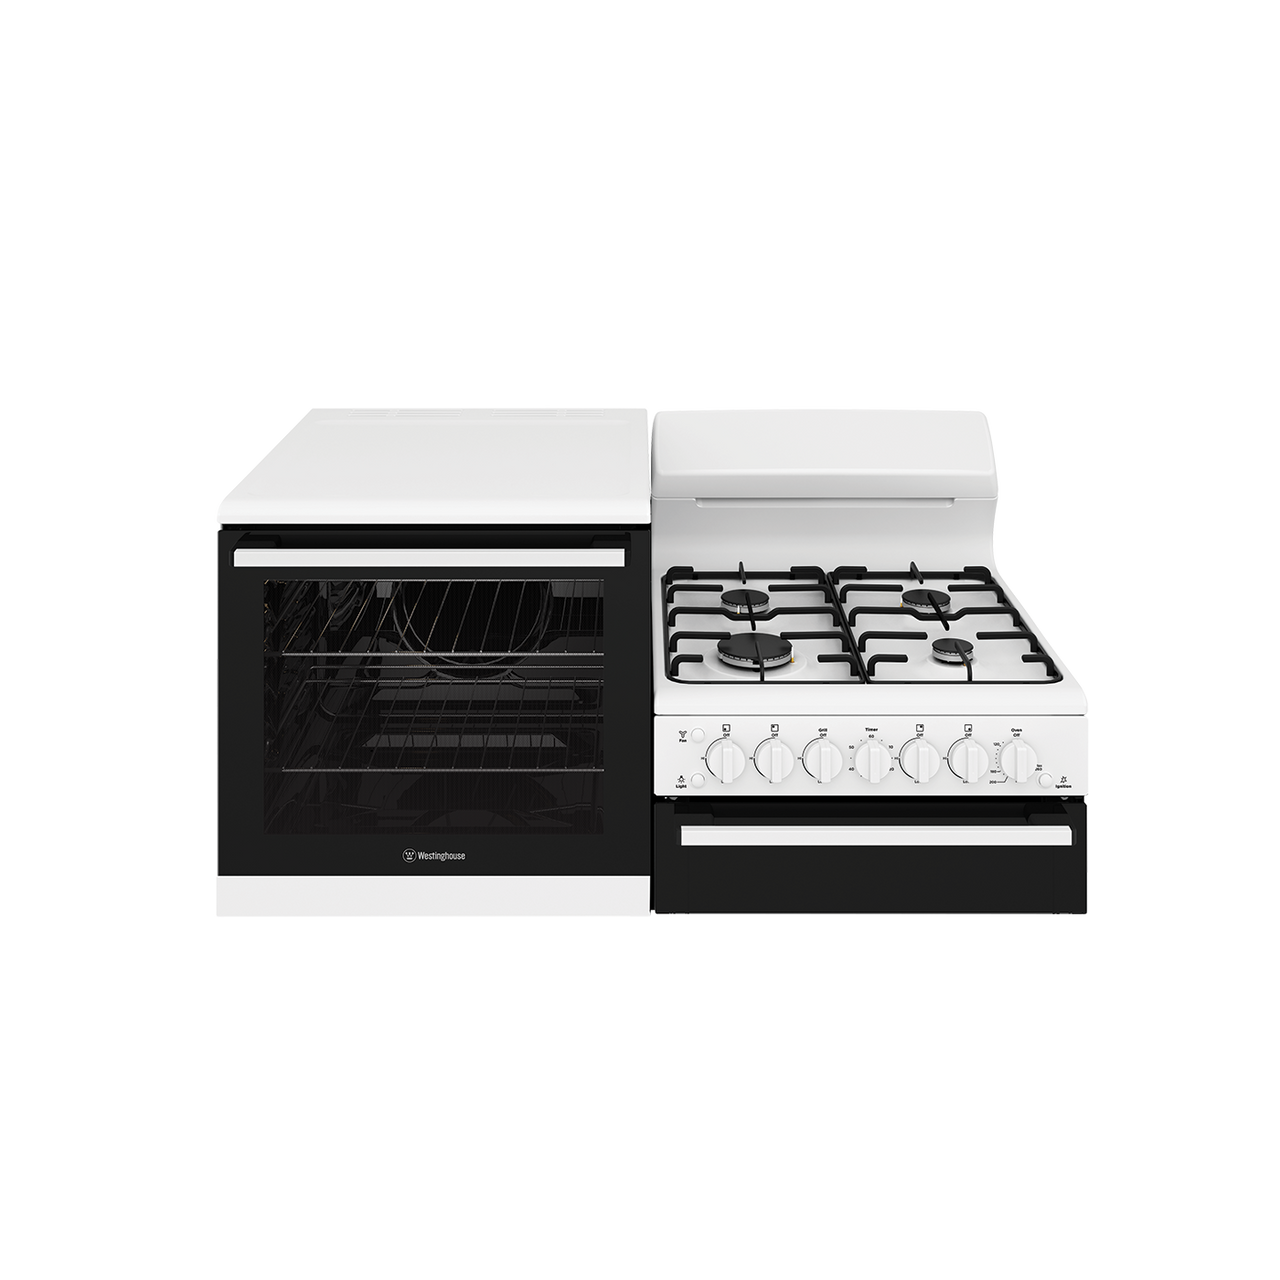 WDG112WC - Left Hand Elevated NatGas Freestanding Cooker, Seperate Grill, Electronic Ignition - White